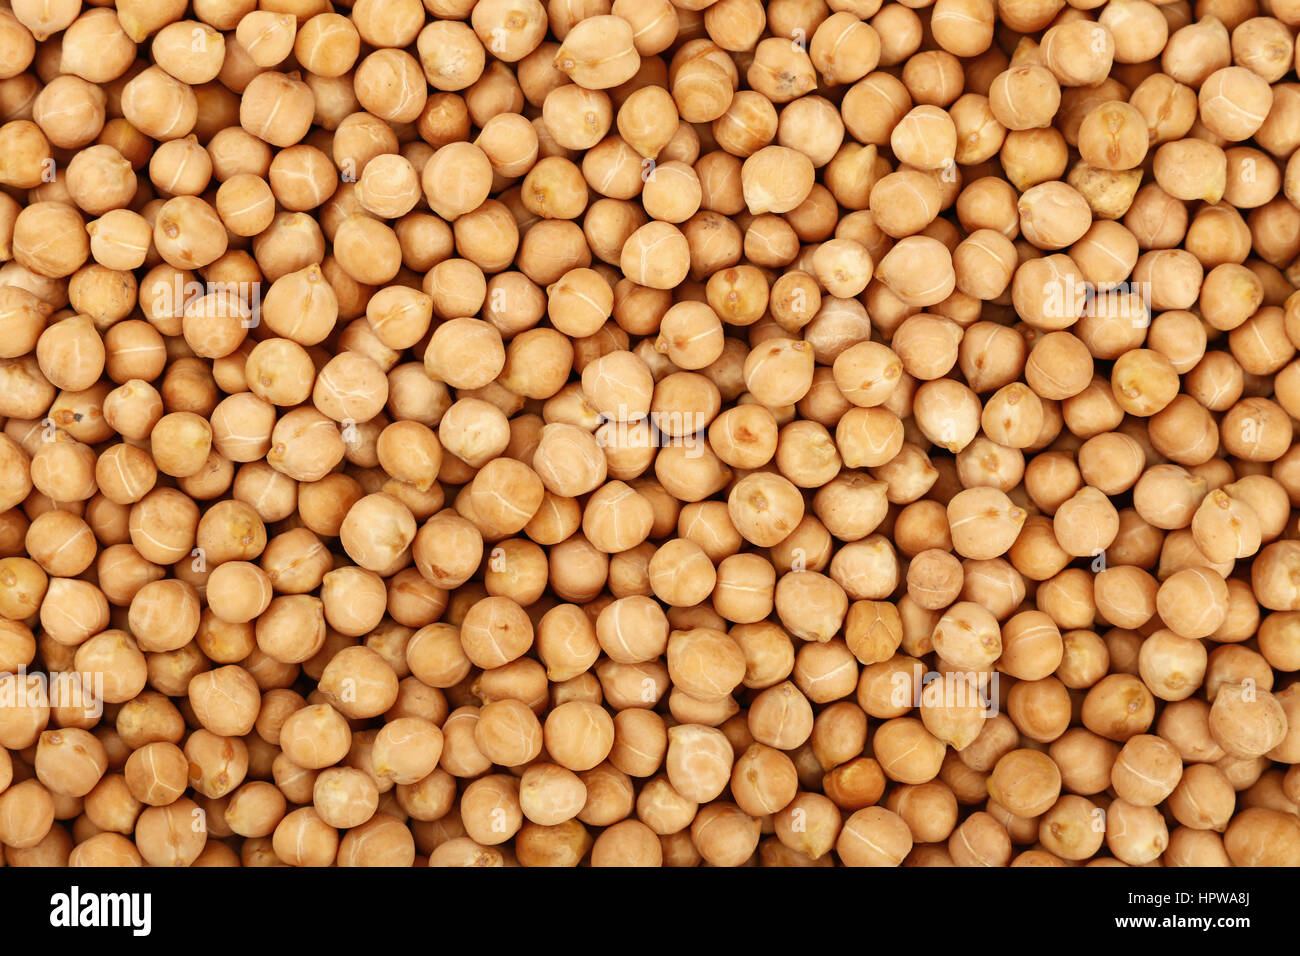 Dried chickpea beans close up pattern background, elevated top view Stock Photo